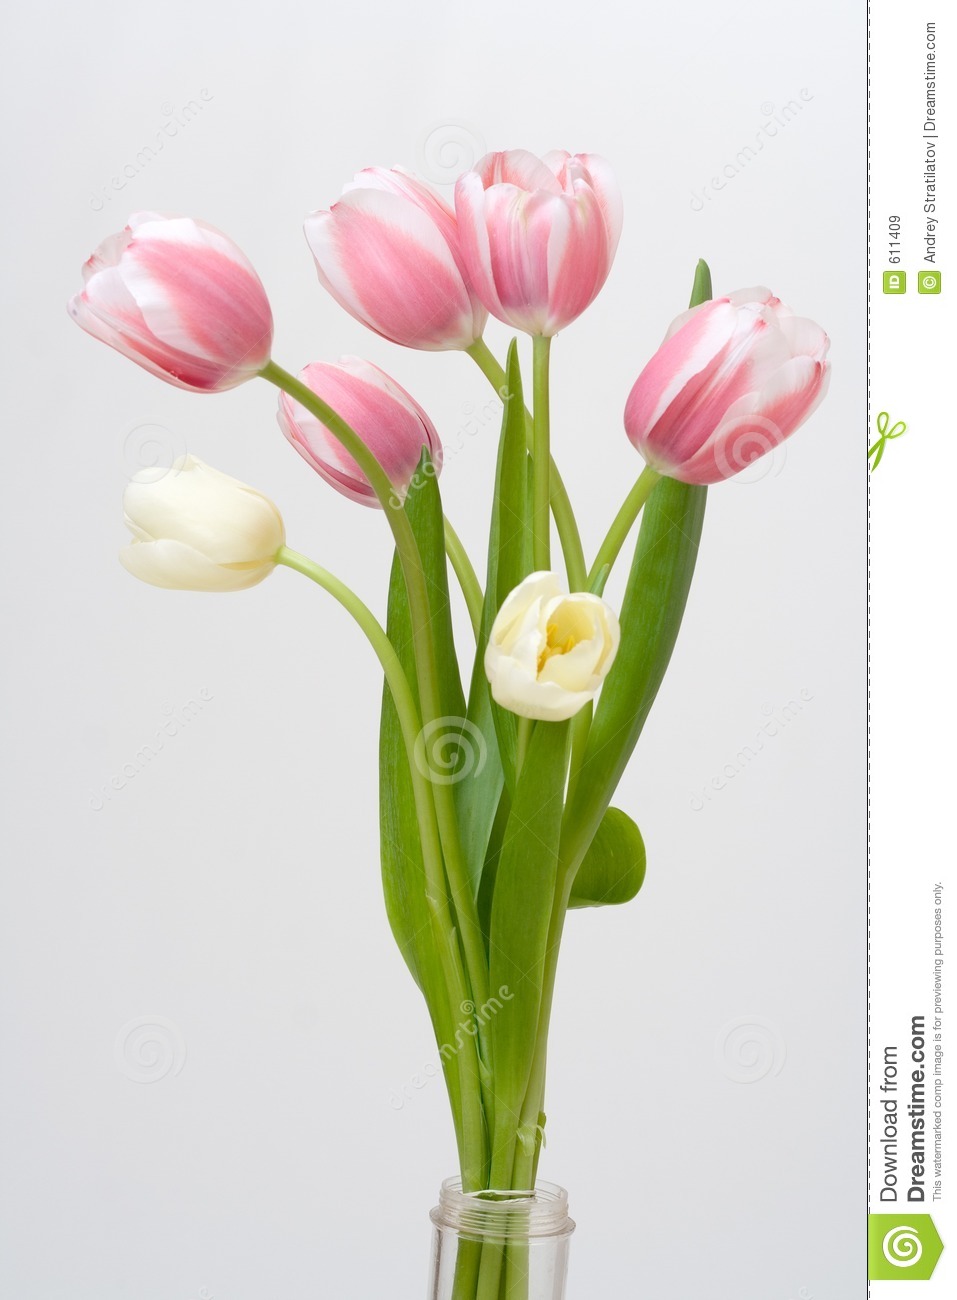 Bouquet Tulip On White Background Royalty Free Stock Images   Image